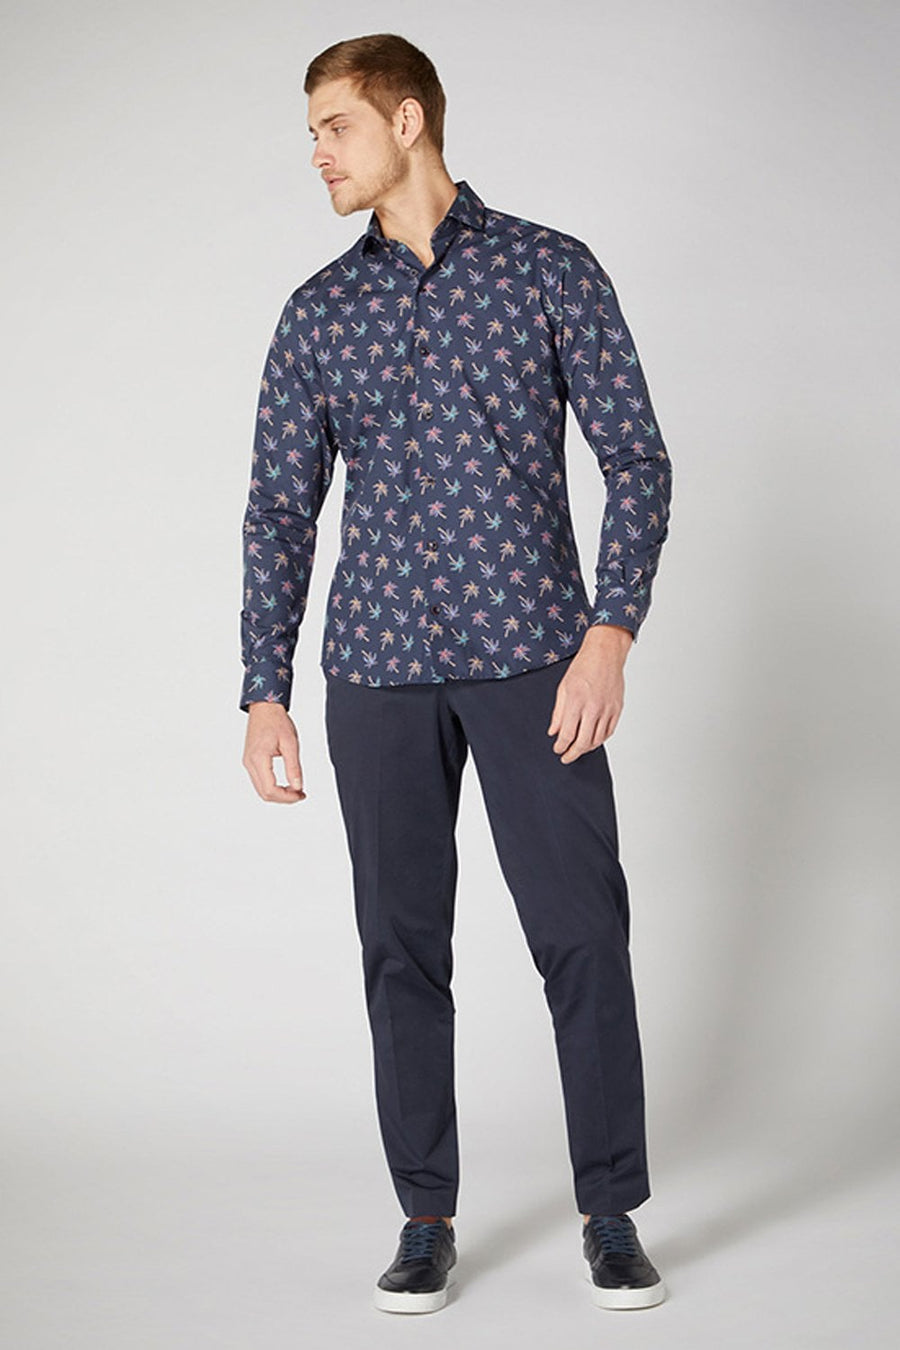 Buy the Remus Uomo Palm Tree Design L/S Shirt in Navy at Intro. Spend £50 for free UK delivery. Official stockists. We ship worldwide.